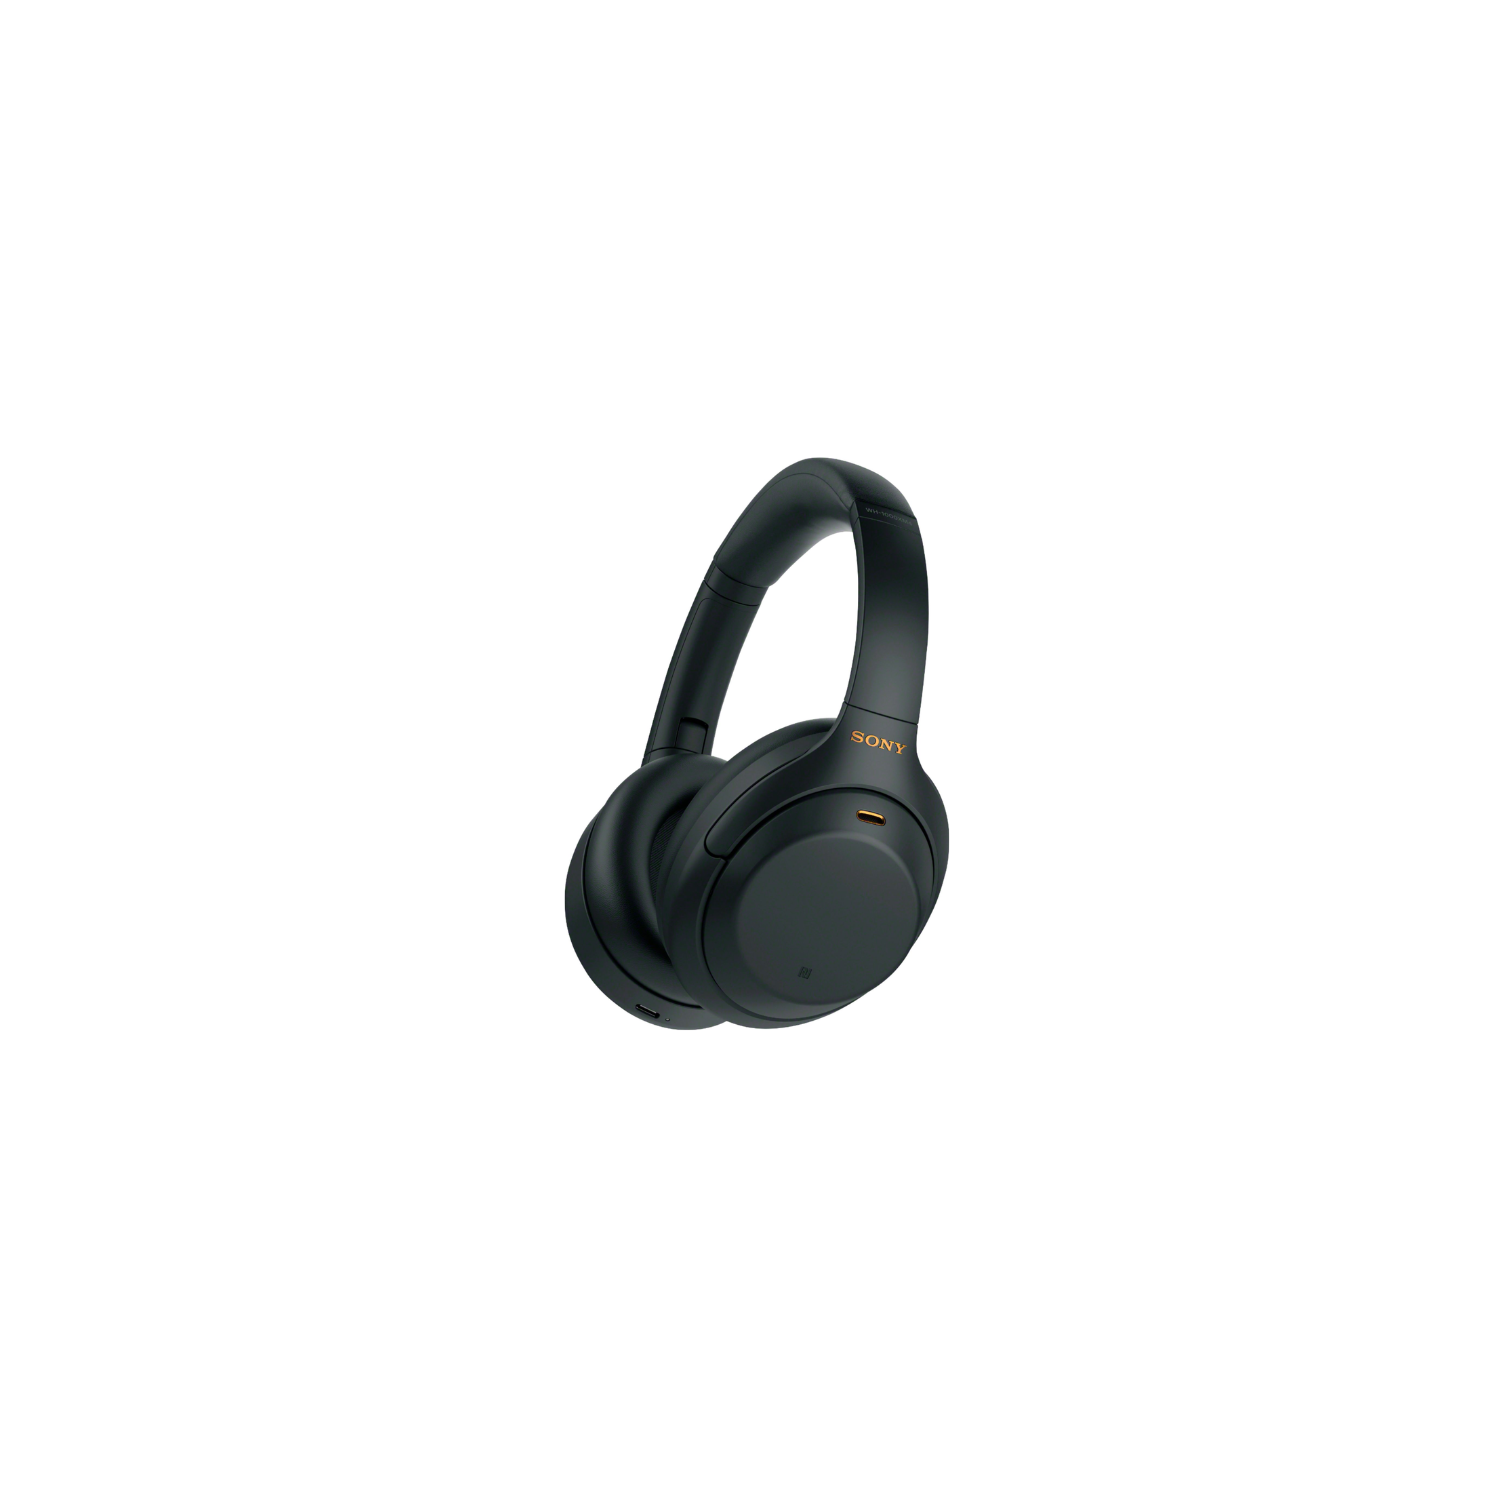 Sony WH-1000XM4 Wireless Industry Leading Noise Canceling